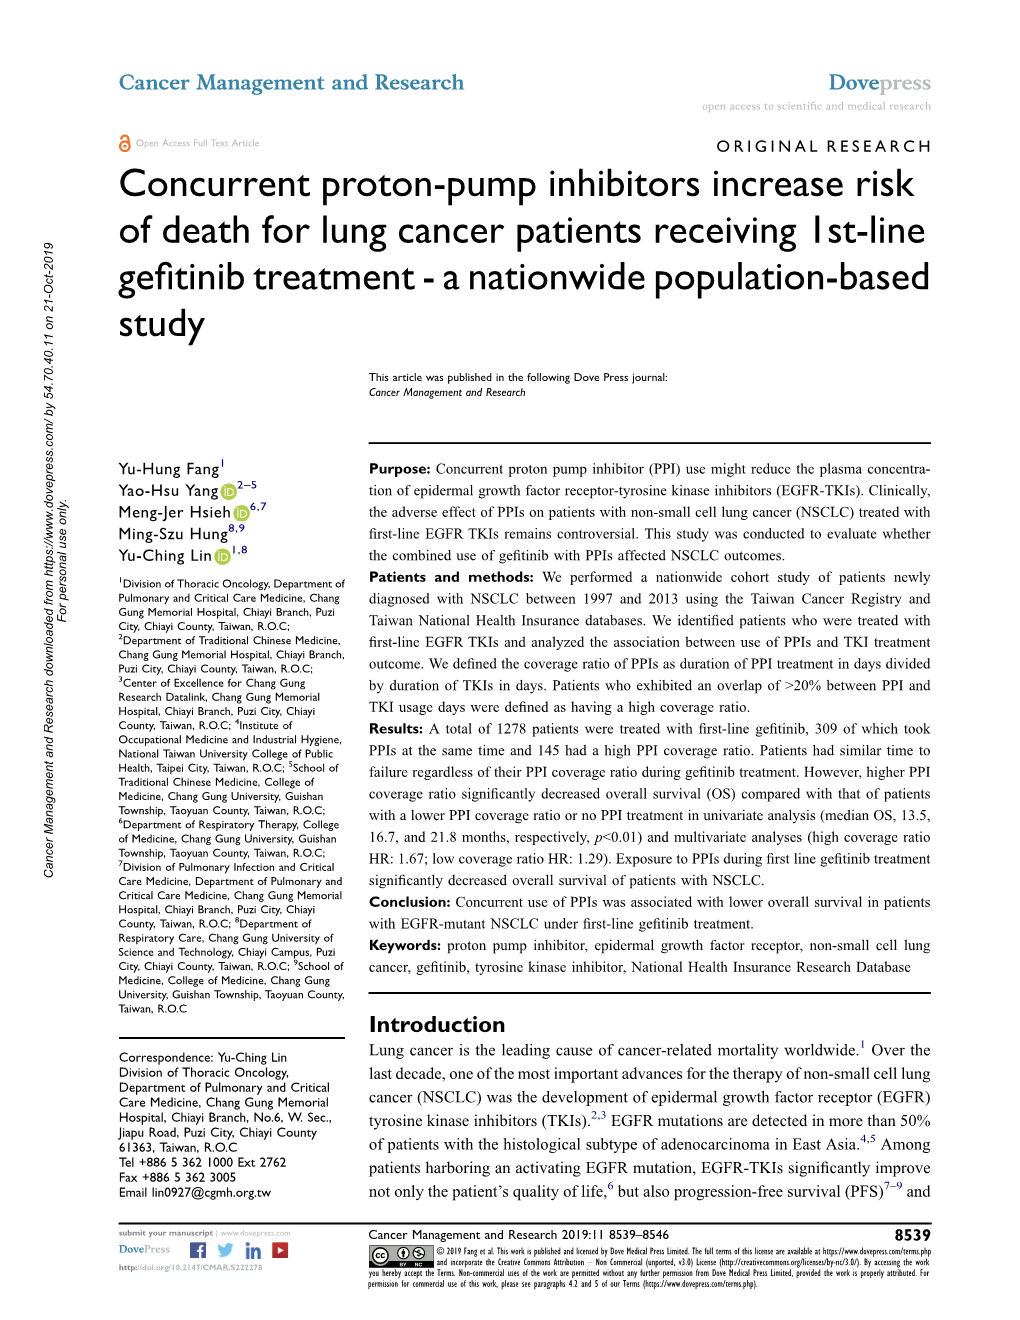 Concurrent Proton-Pump Inhibitors Increase Risk of Death for Lung Cancer Patients Receiving 1St-Line Geﬁtinib Treatment - a Nationwide Population-Based Study